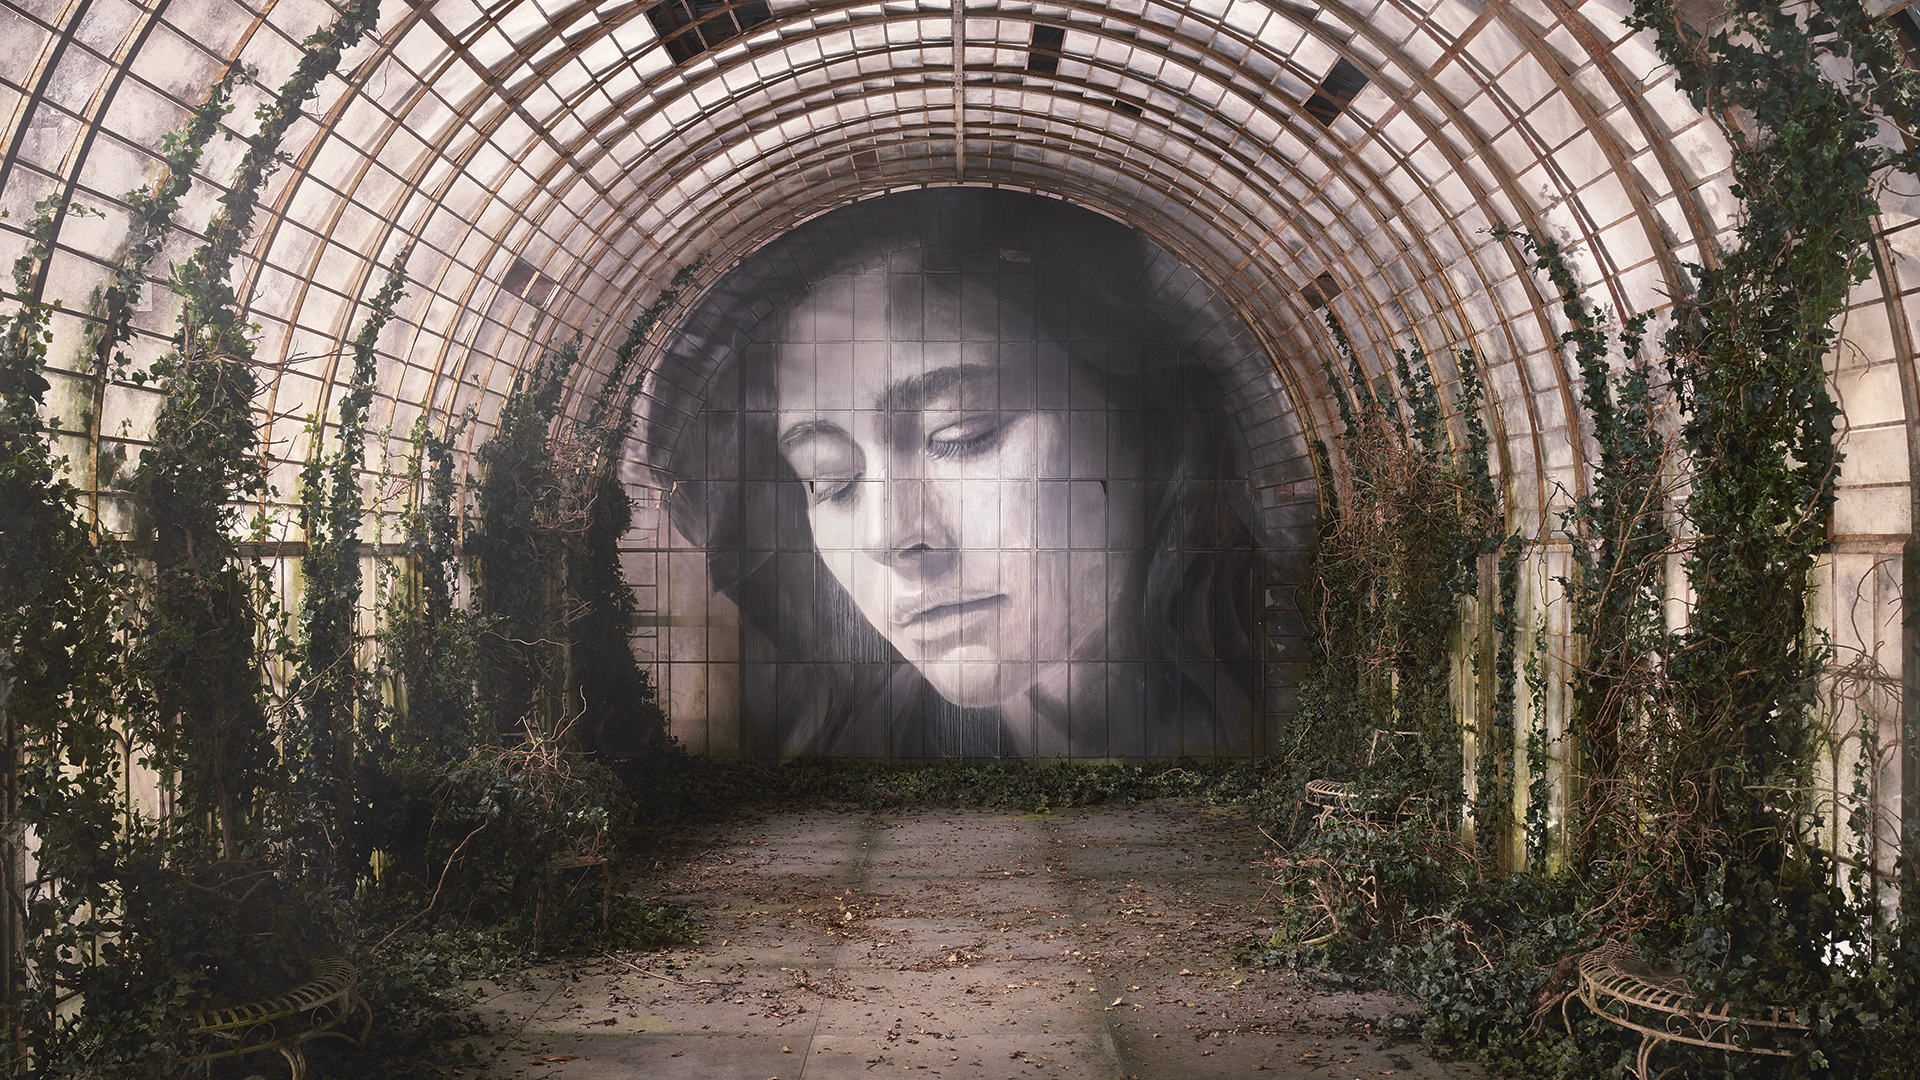 Mural of a woman's face in a decaying urban space